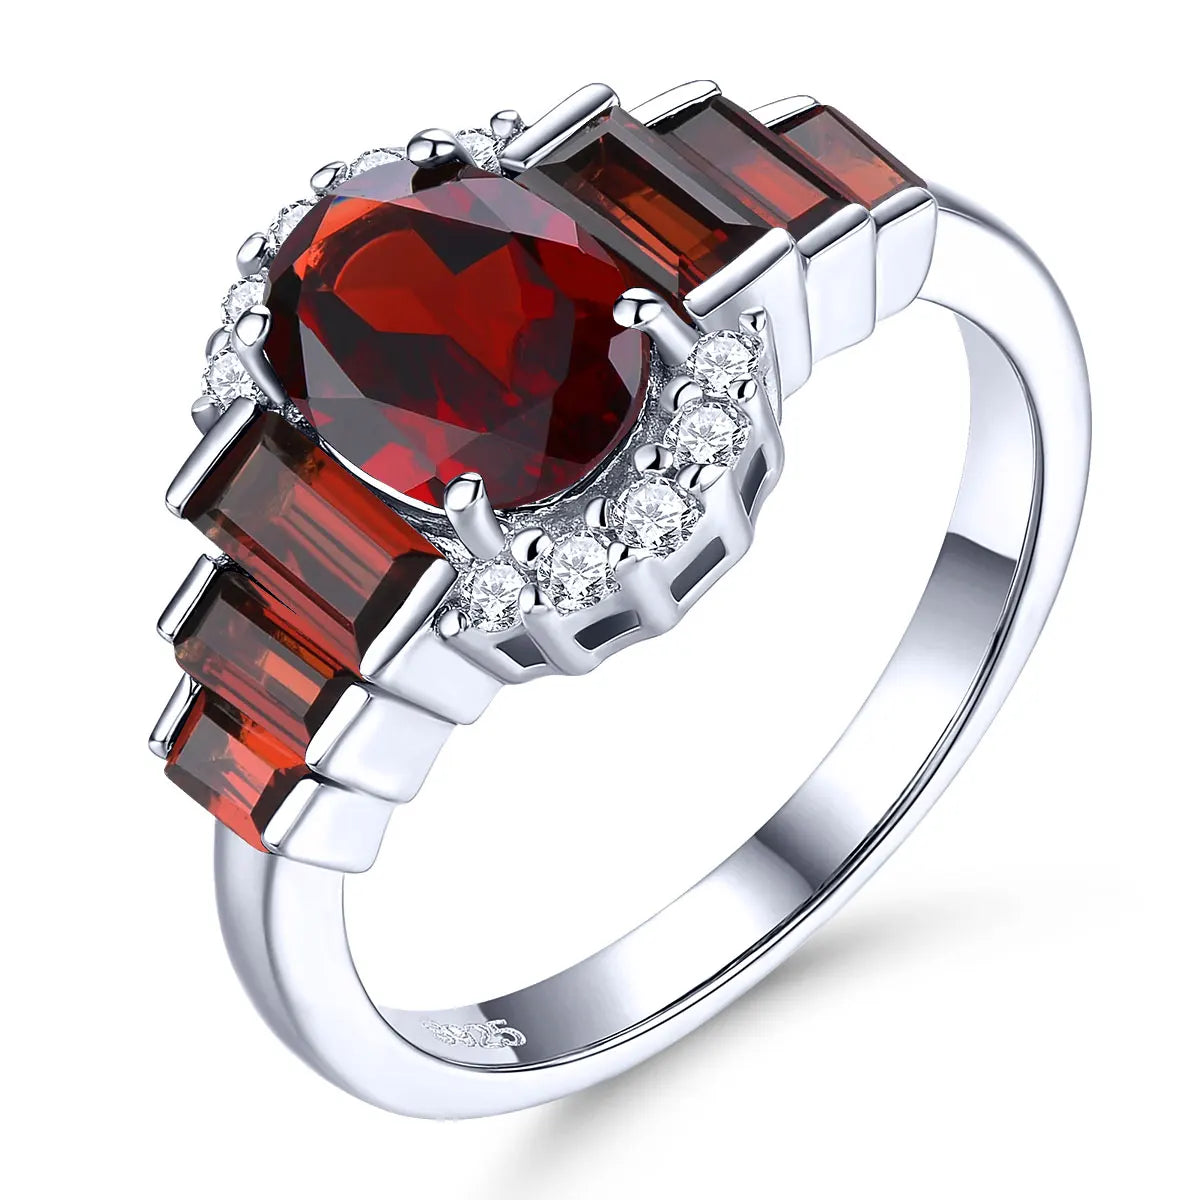 Natural Red Garnet Sterling Silver Rings 2.3 Carats Genuine January Birthstone Women Elegant Classic Style S925 Fine Jewelrys Natural Garnet